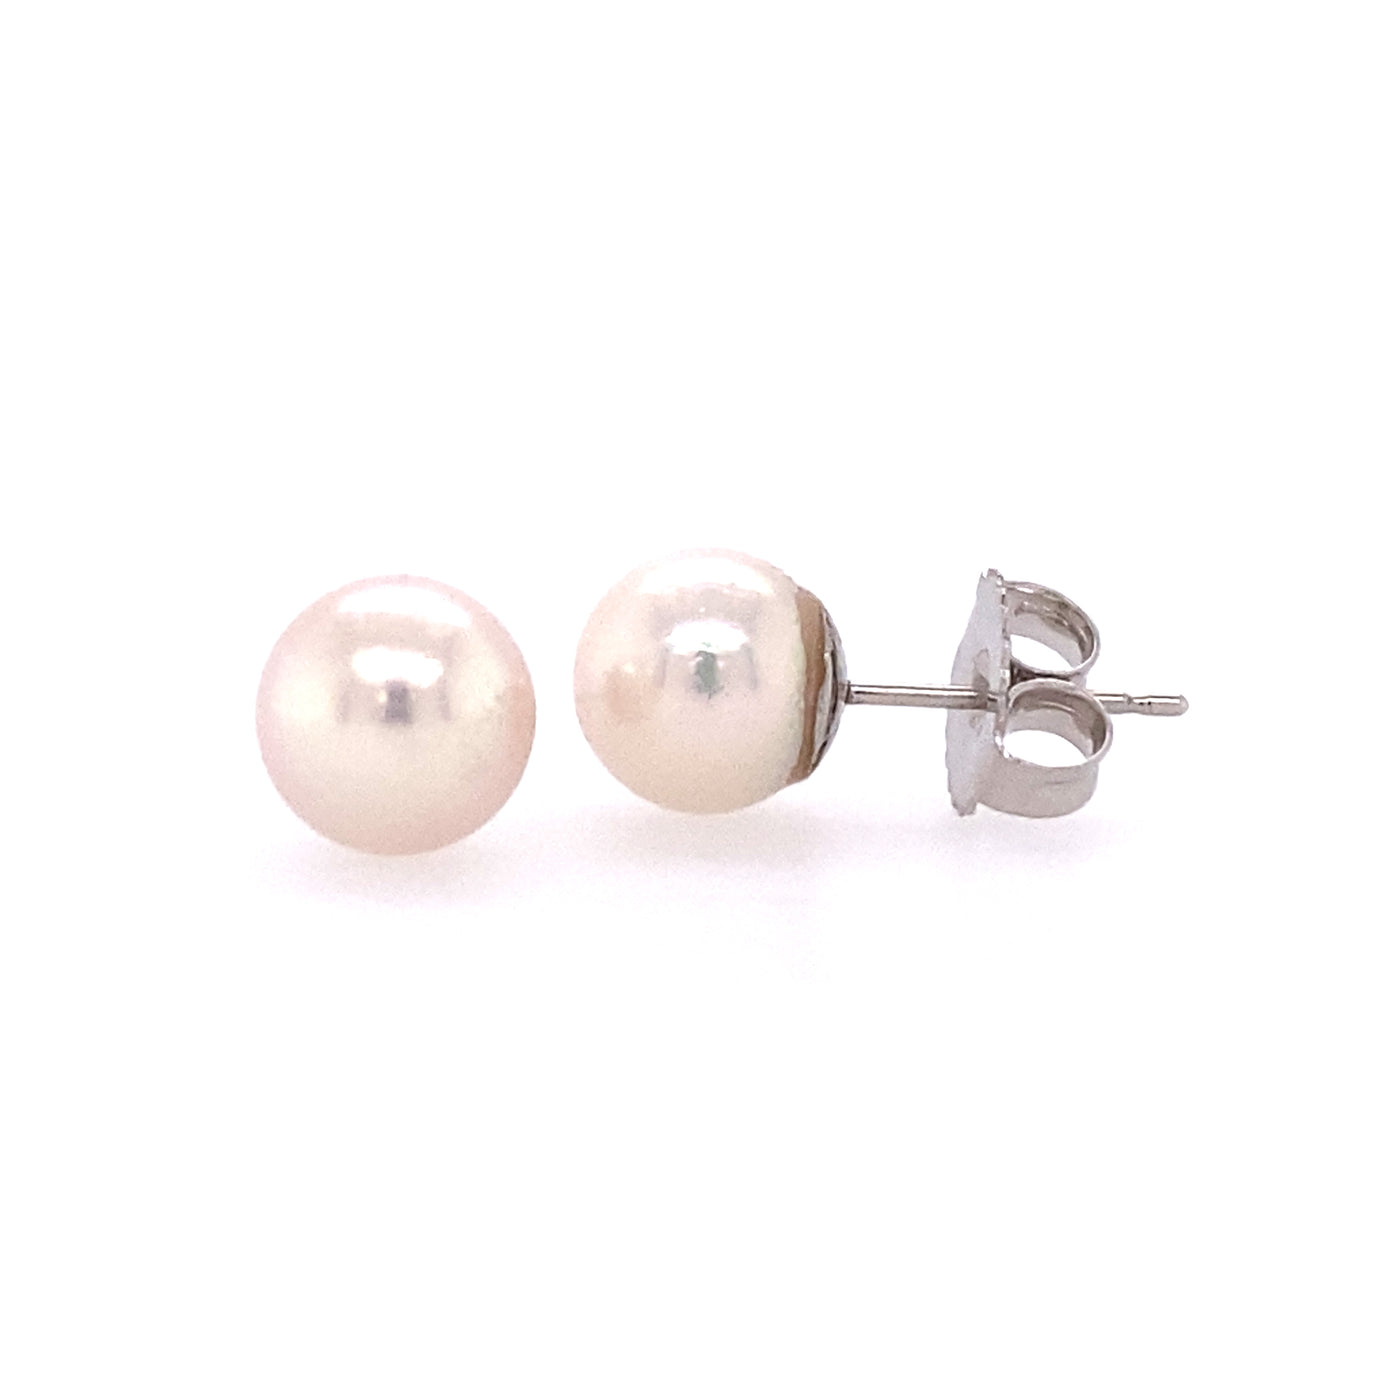 Beeghly & Co. 14 Karat Pearl Grand Earrings BCE-AS-7.5PW